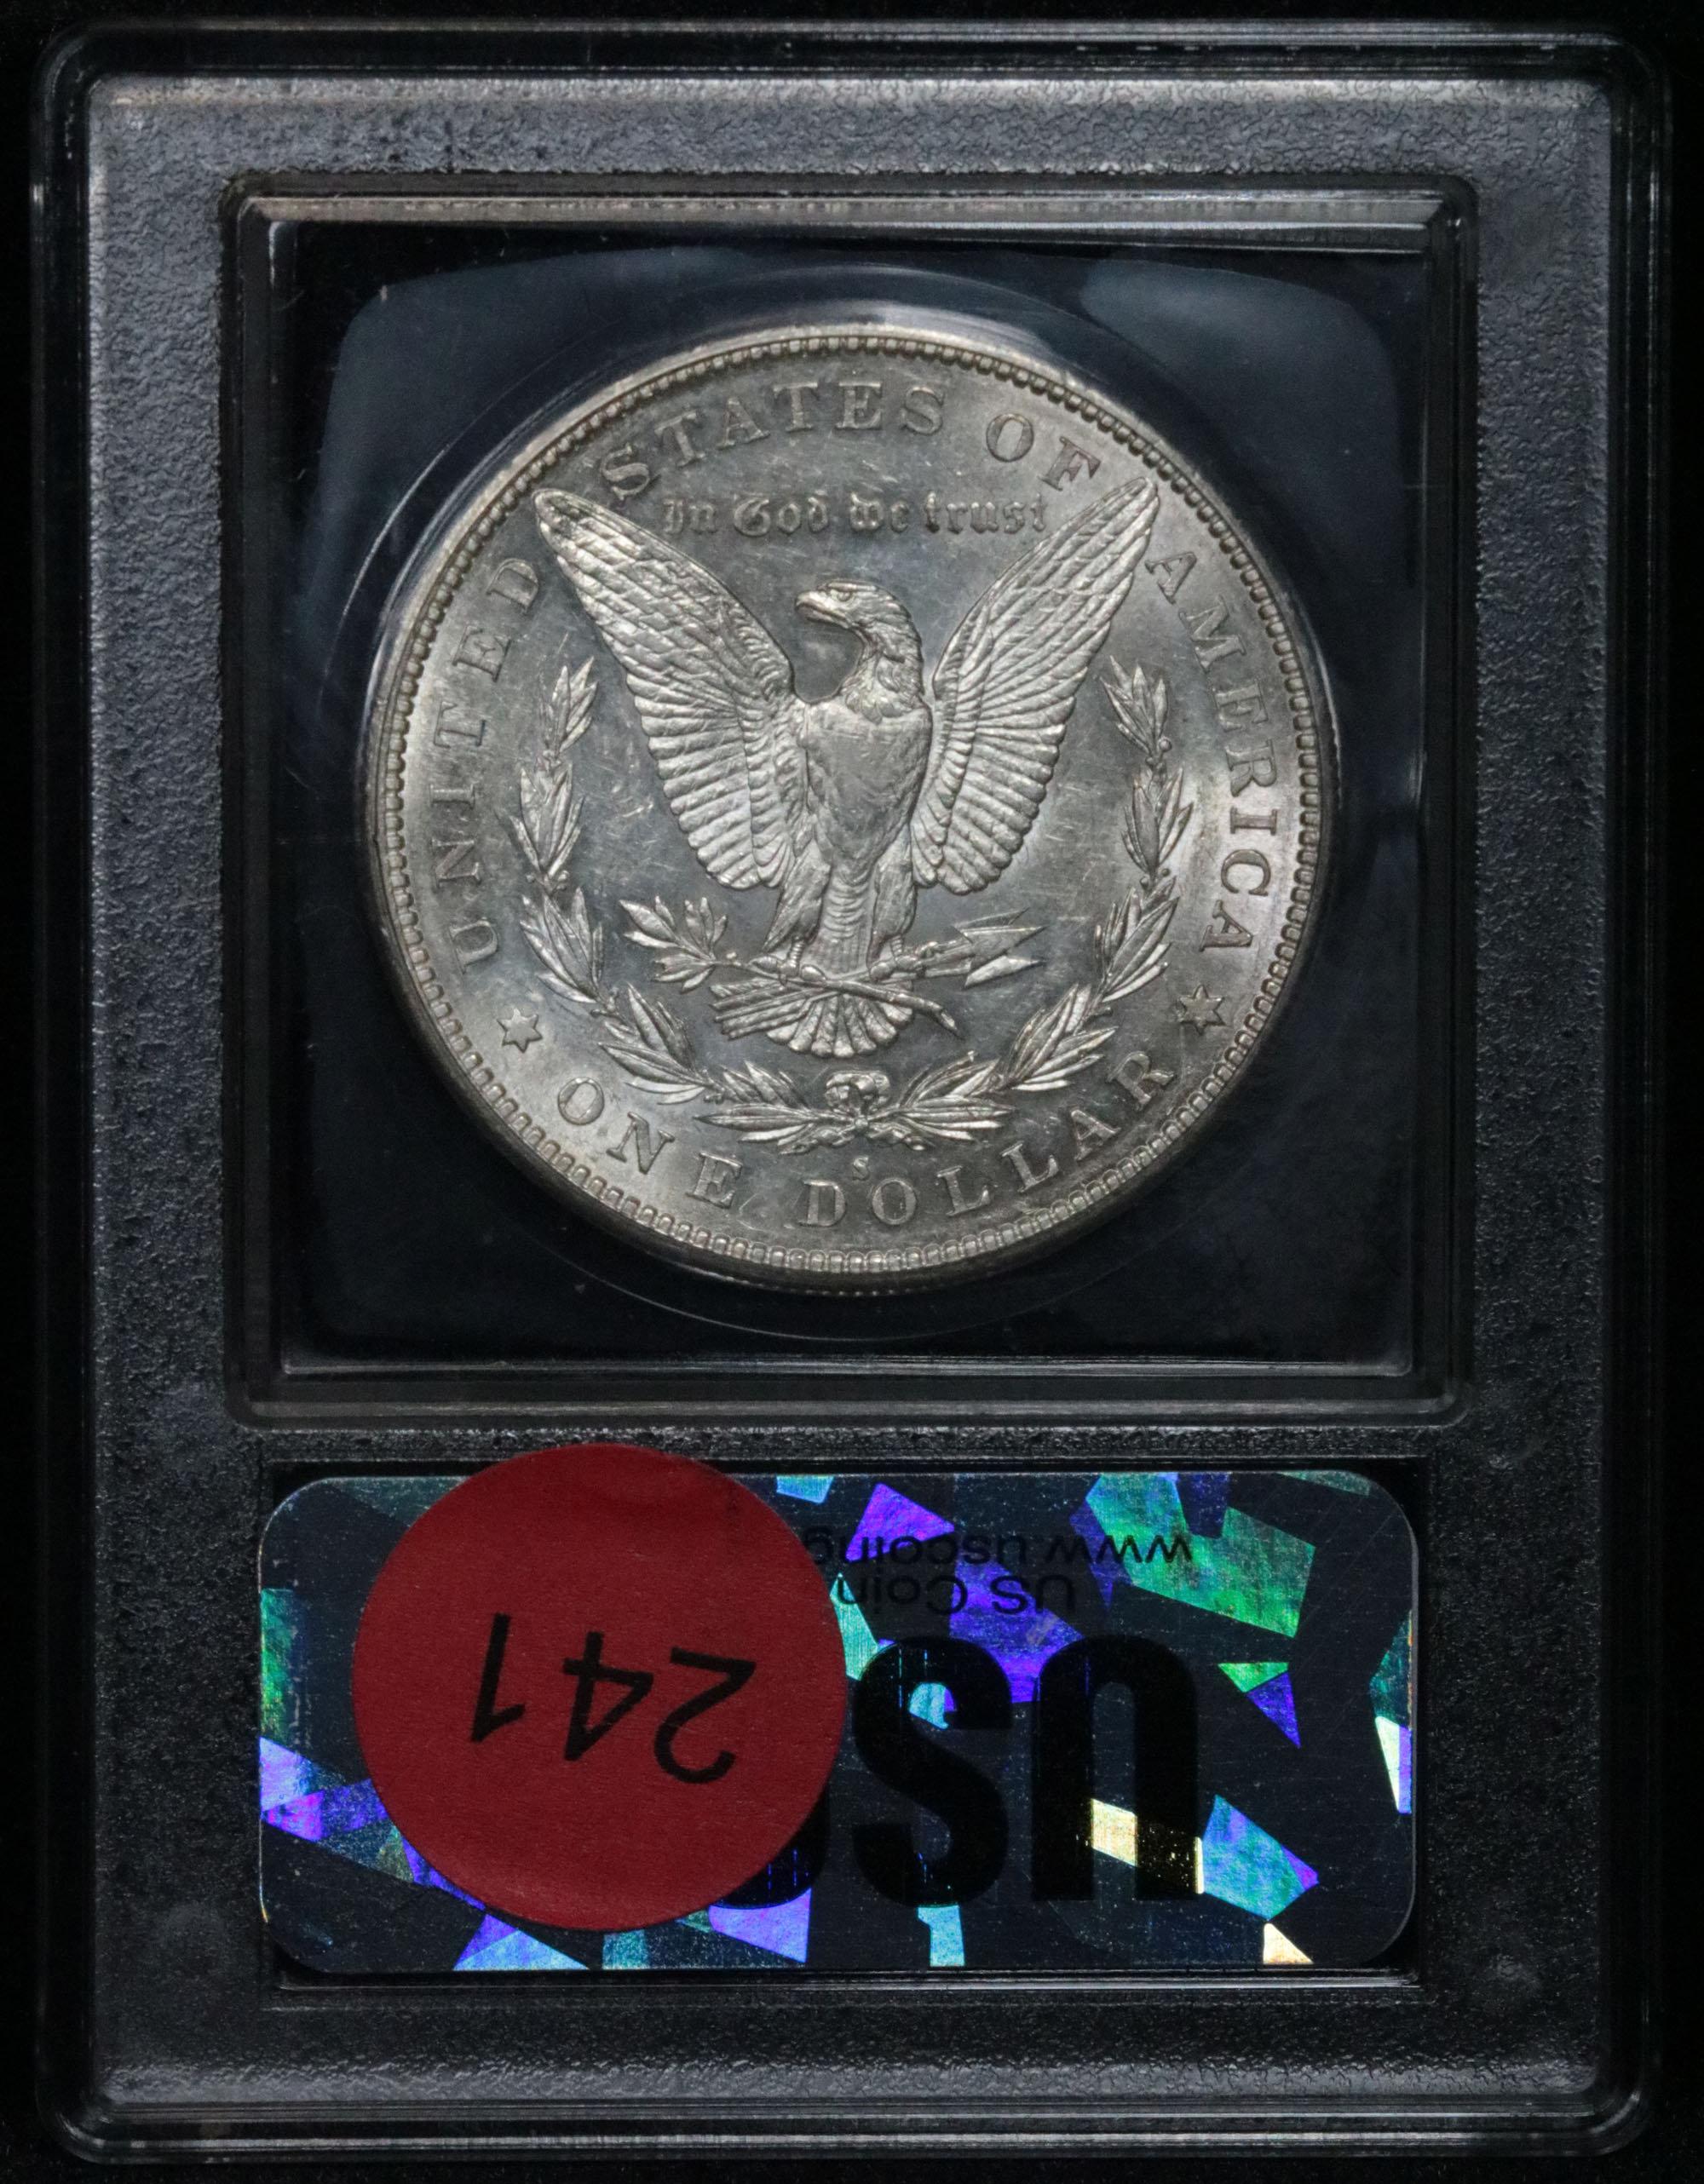 ***Auction Highlight*** 1884-s Morgan Dollar $1 Graded Select Unc PL by USCG (fc)